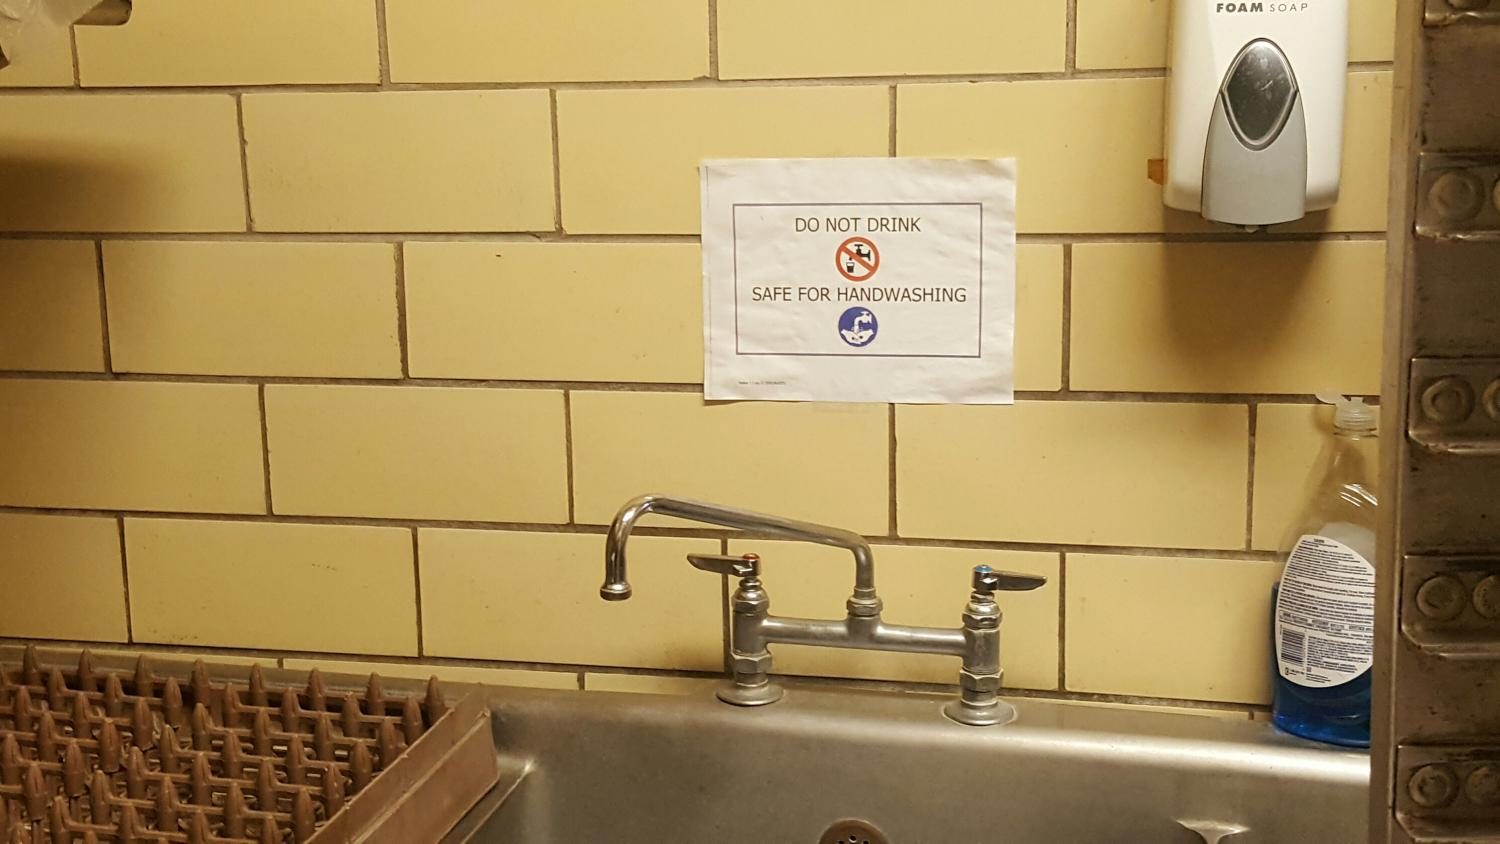 Testing 194 samples in the district, officials discover that 25 water outlets exceeded the legal limit of 15 ug/l in parts per billion. The sink in cafeteria cookie room is one such spigot, now advising that the water is not for consumption. 